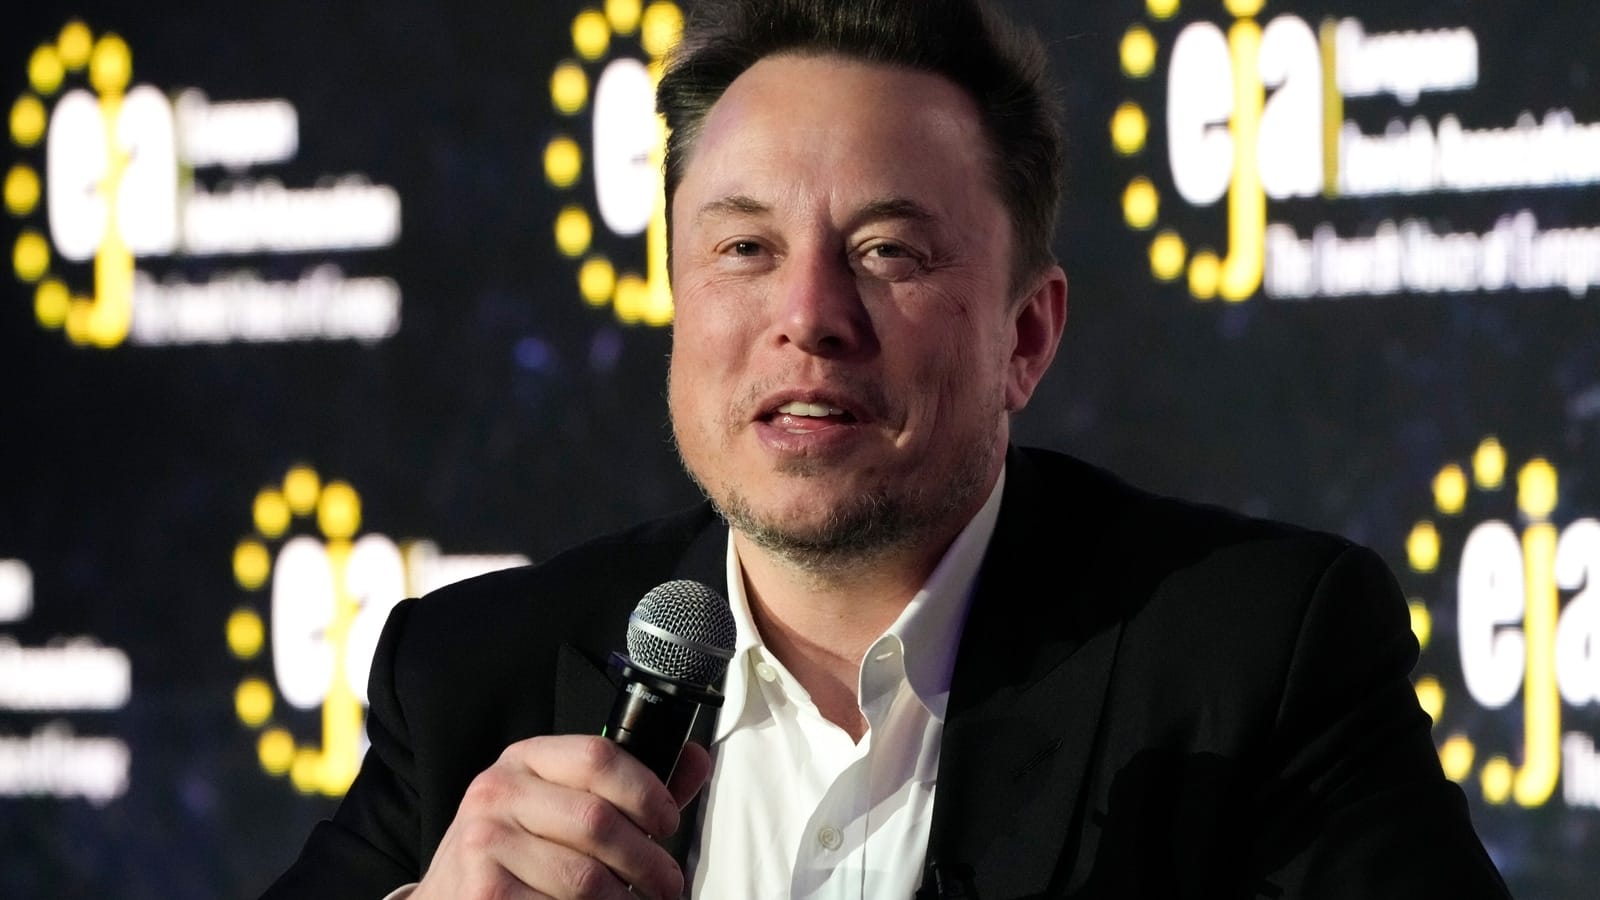 Elon Musk used to sleep on the floor under his desk. Here’s why